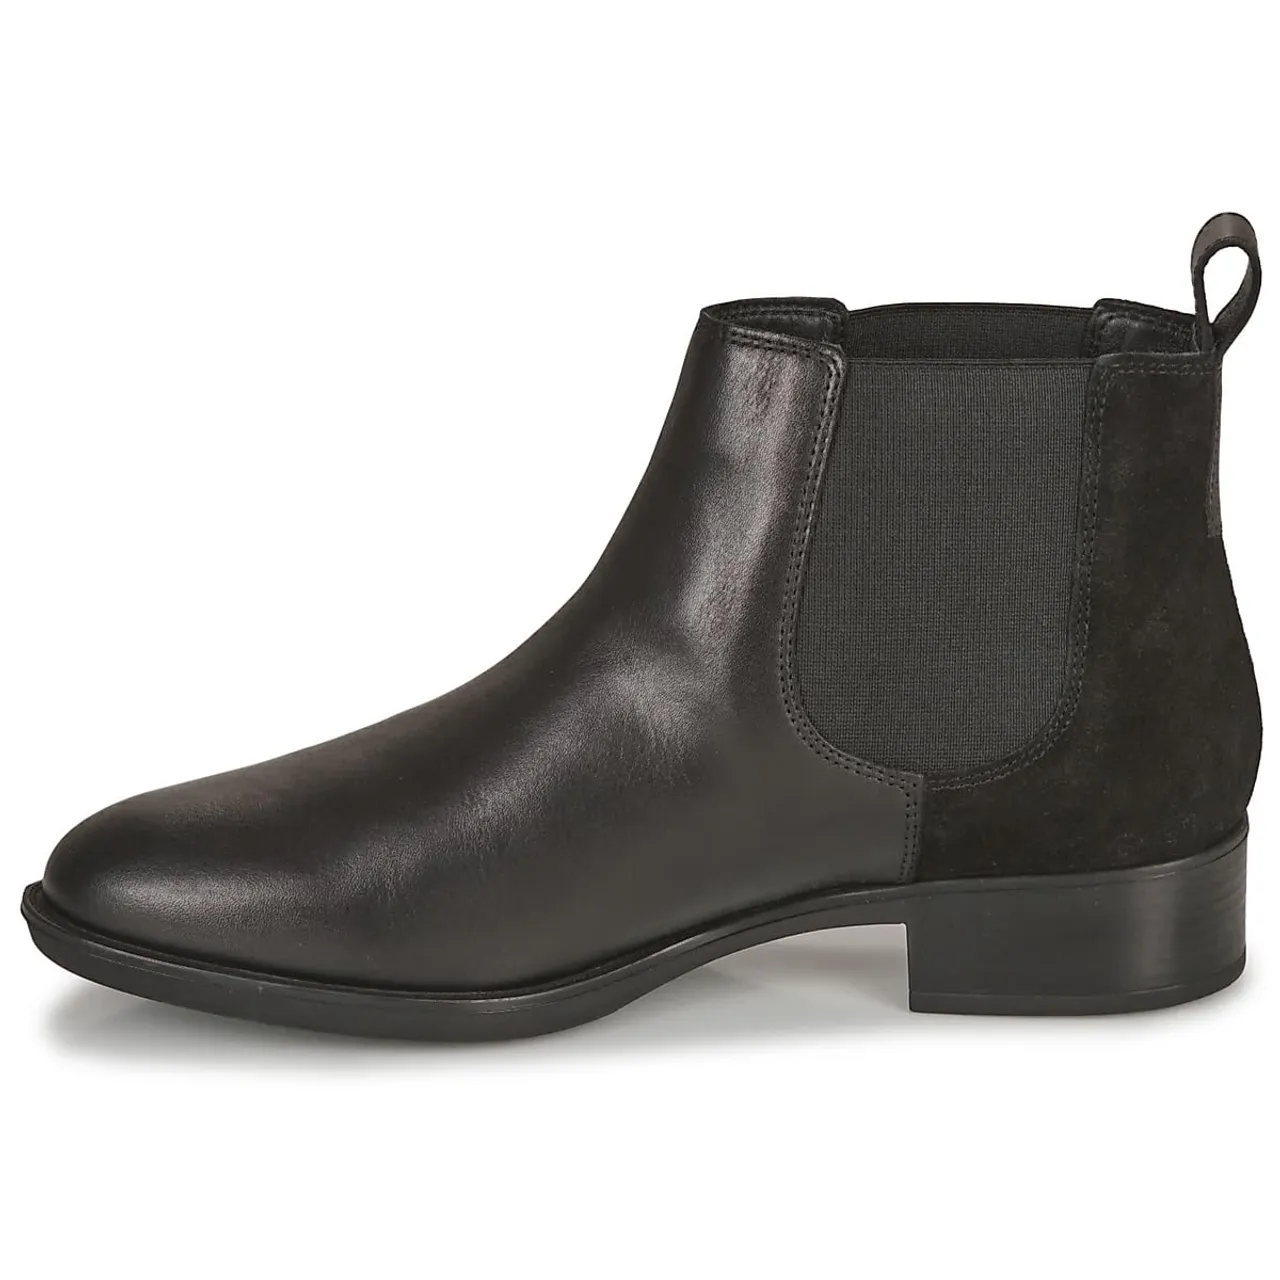 Geox D Felicity Ankle Boot